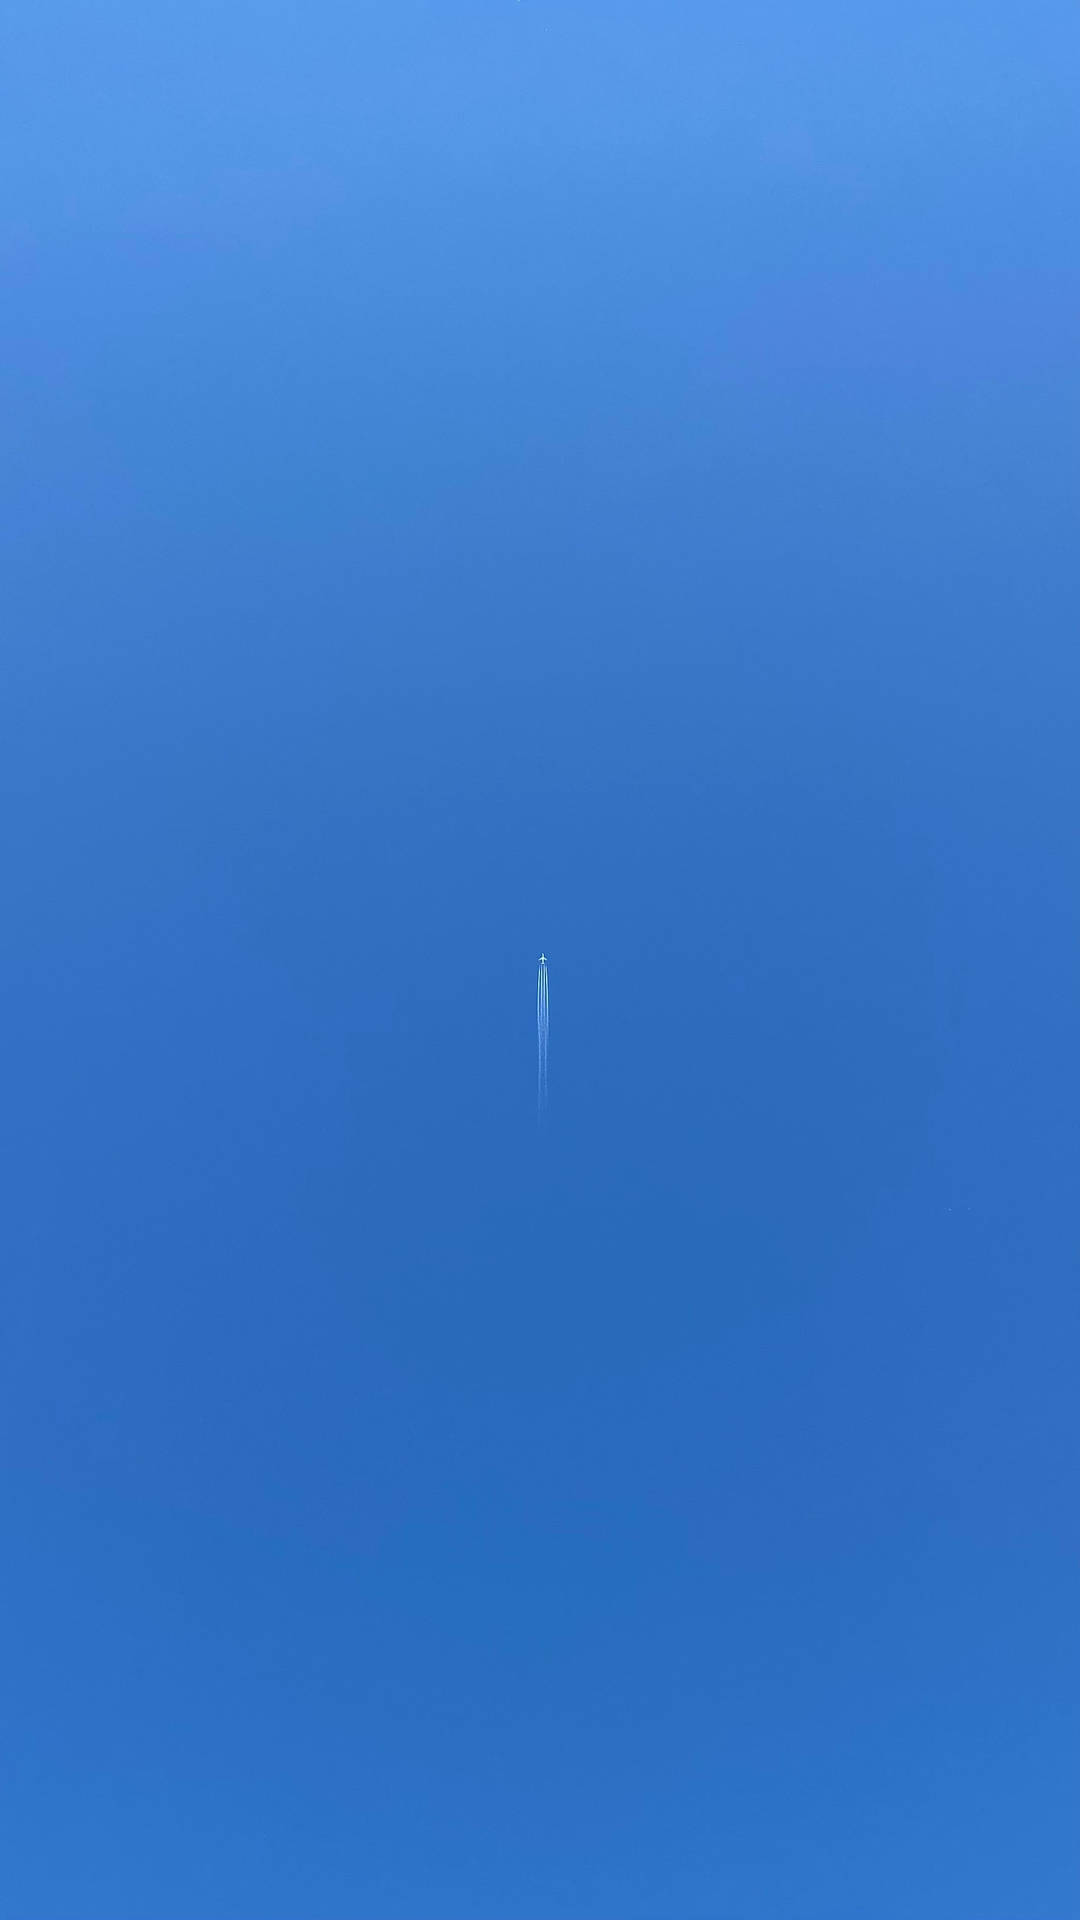 A Small Plane Trails A Ribbon Of Cloudy Vapor In The Sky Background